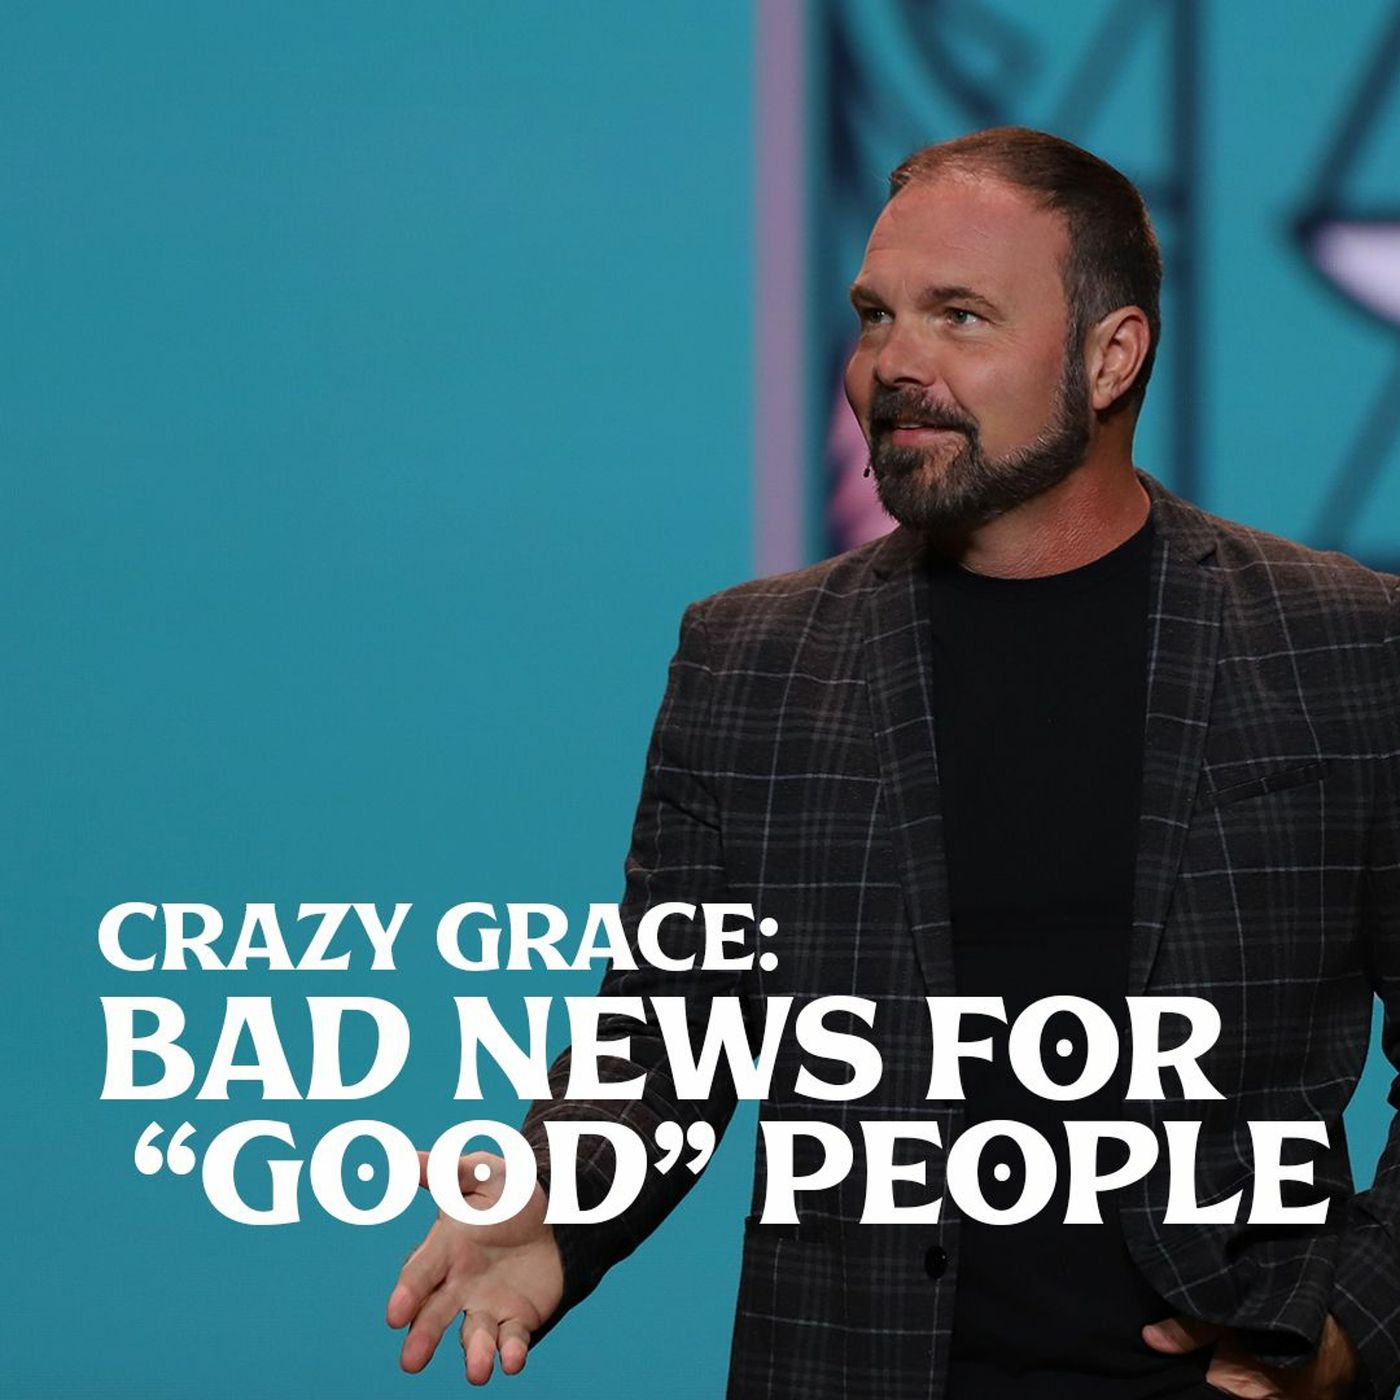 Romans #6 - Crazy Grace: Bad News for “Good” People